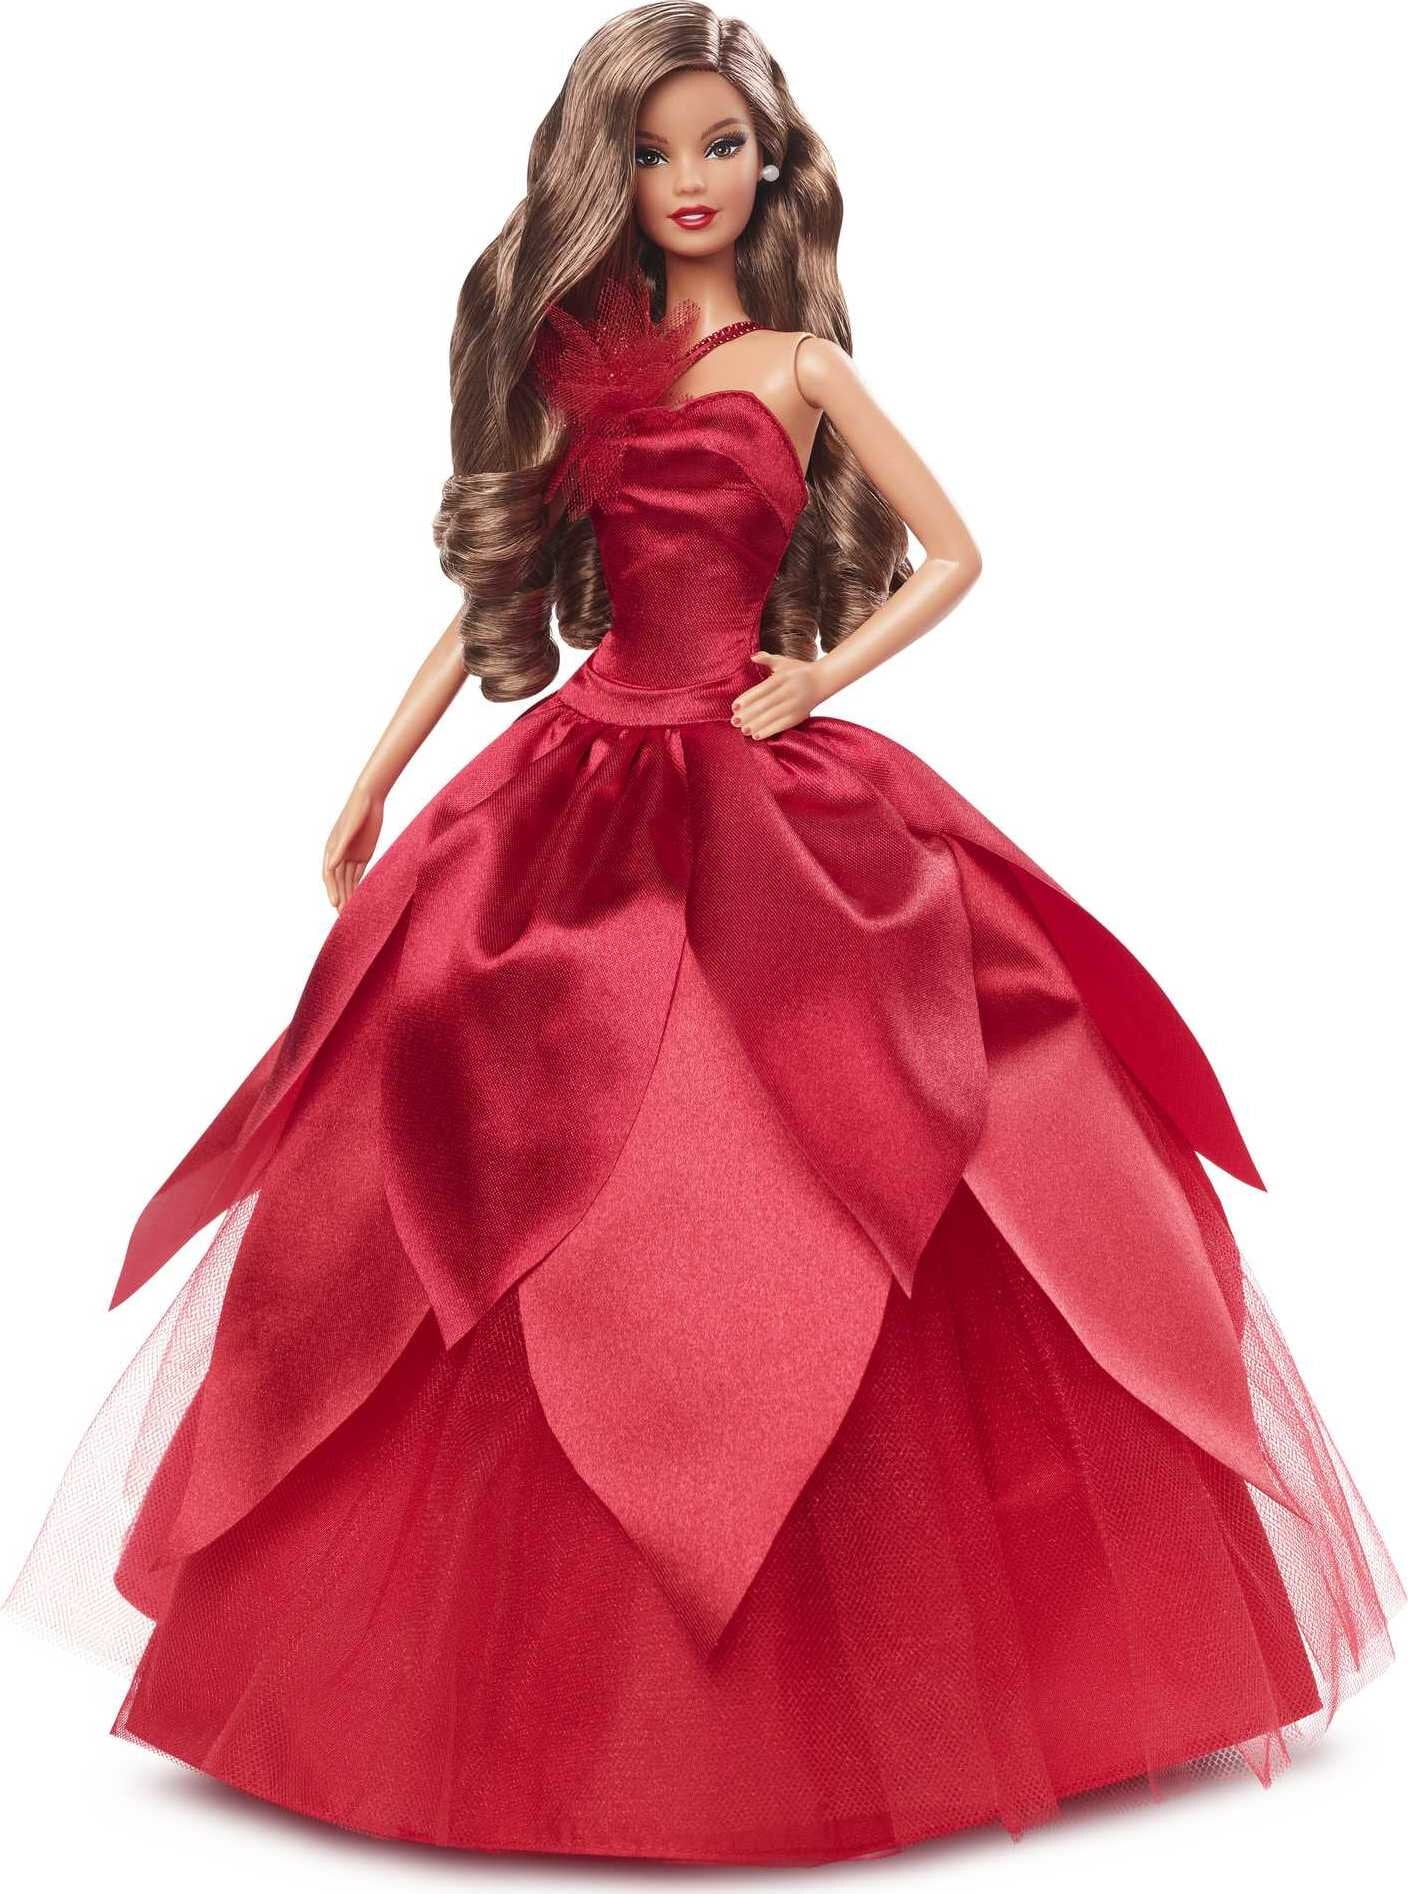 DRESS ONLY * BARBIE DOLL DRESS , MODEL MUSE, RED METALLIC EVENING GOWN |  eBay